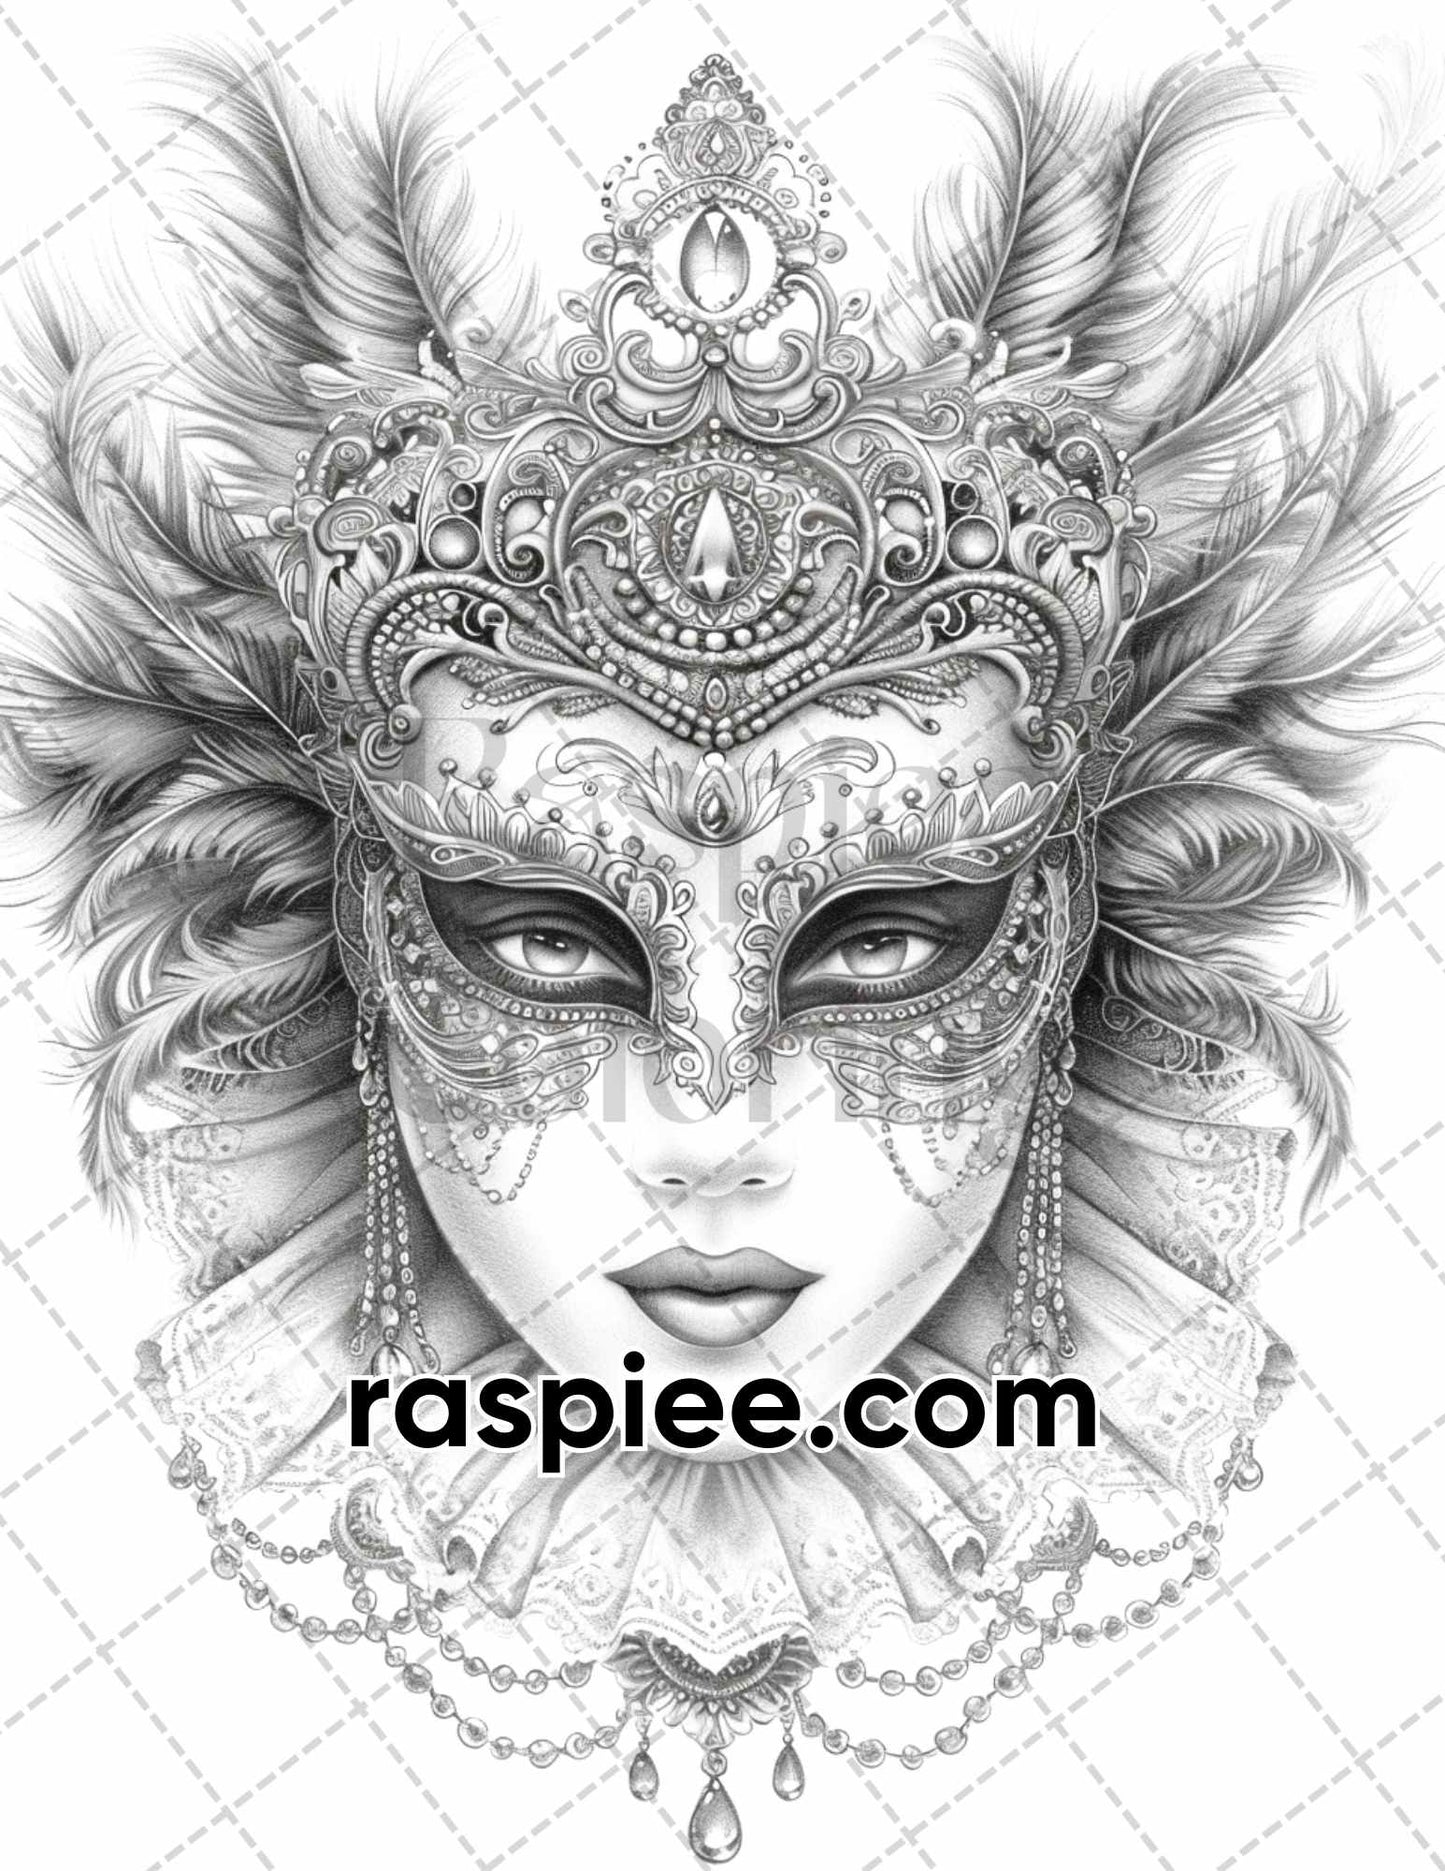 adult coloring pages, adult coloring sheets, adult coloring book pdf, adult coloring book printable, grayscale coloring pages, grayscale coloring books, gothic coloring pages for adults, gothic tattoos coloring book, grayscale illustration, tattoos coloring pages